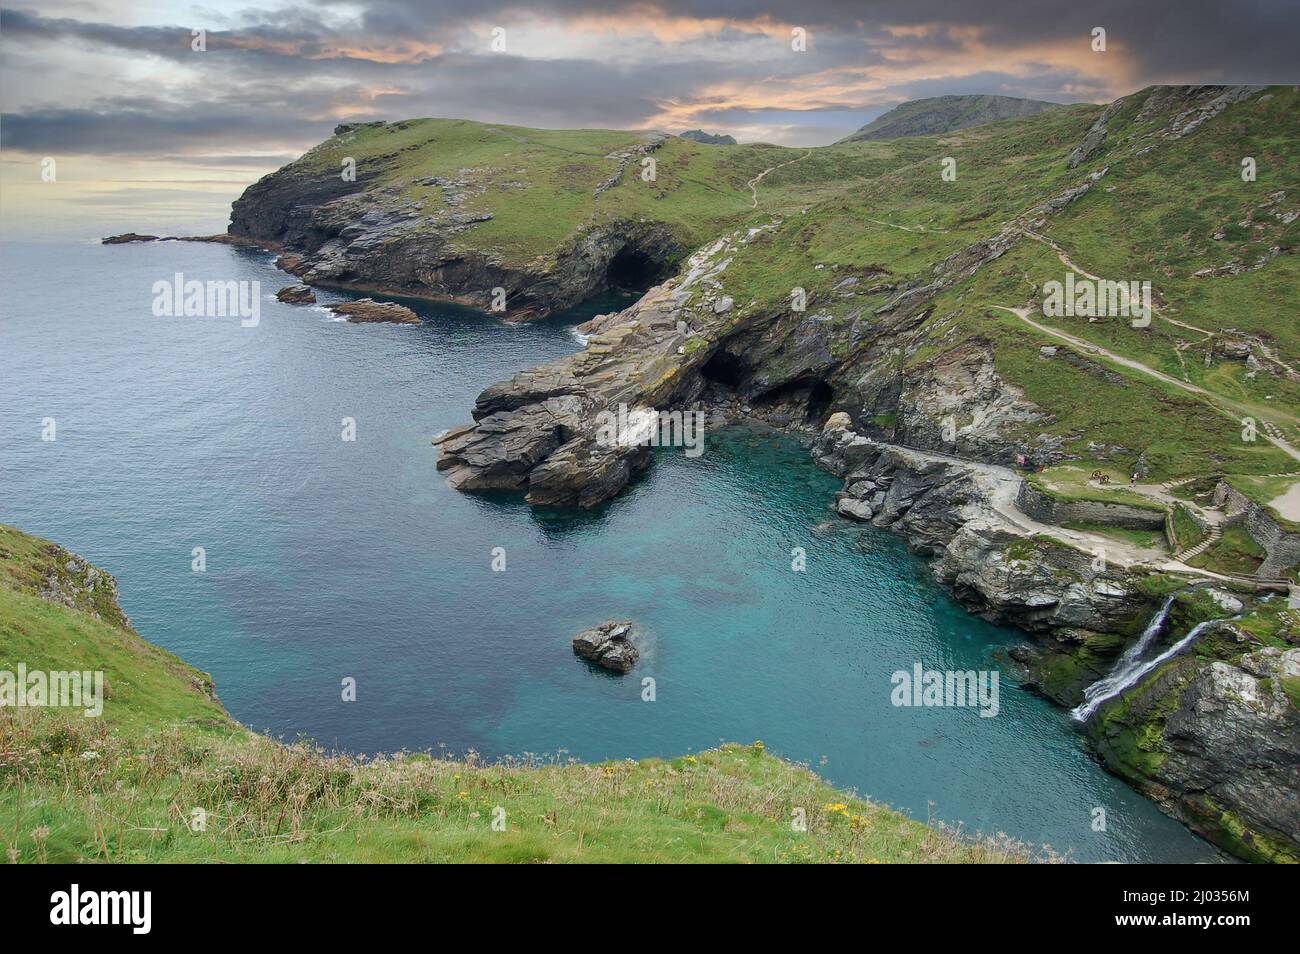 Merlin’s Cave in the bay beside Tintagel in north coast of Cornwall, UK, a centre of British legends about King Arthur. Stock Photo